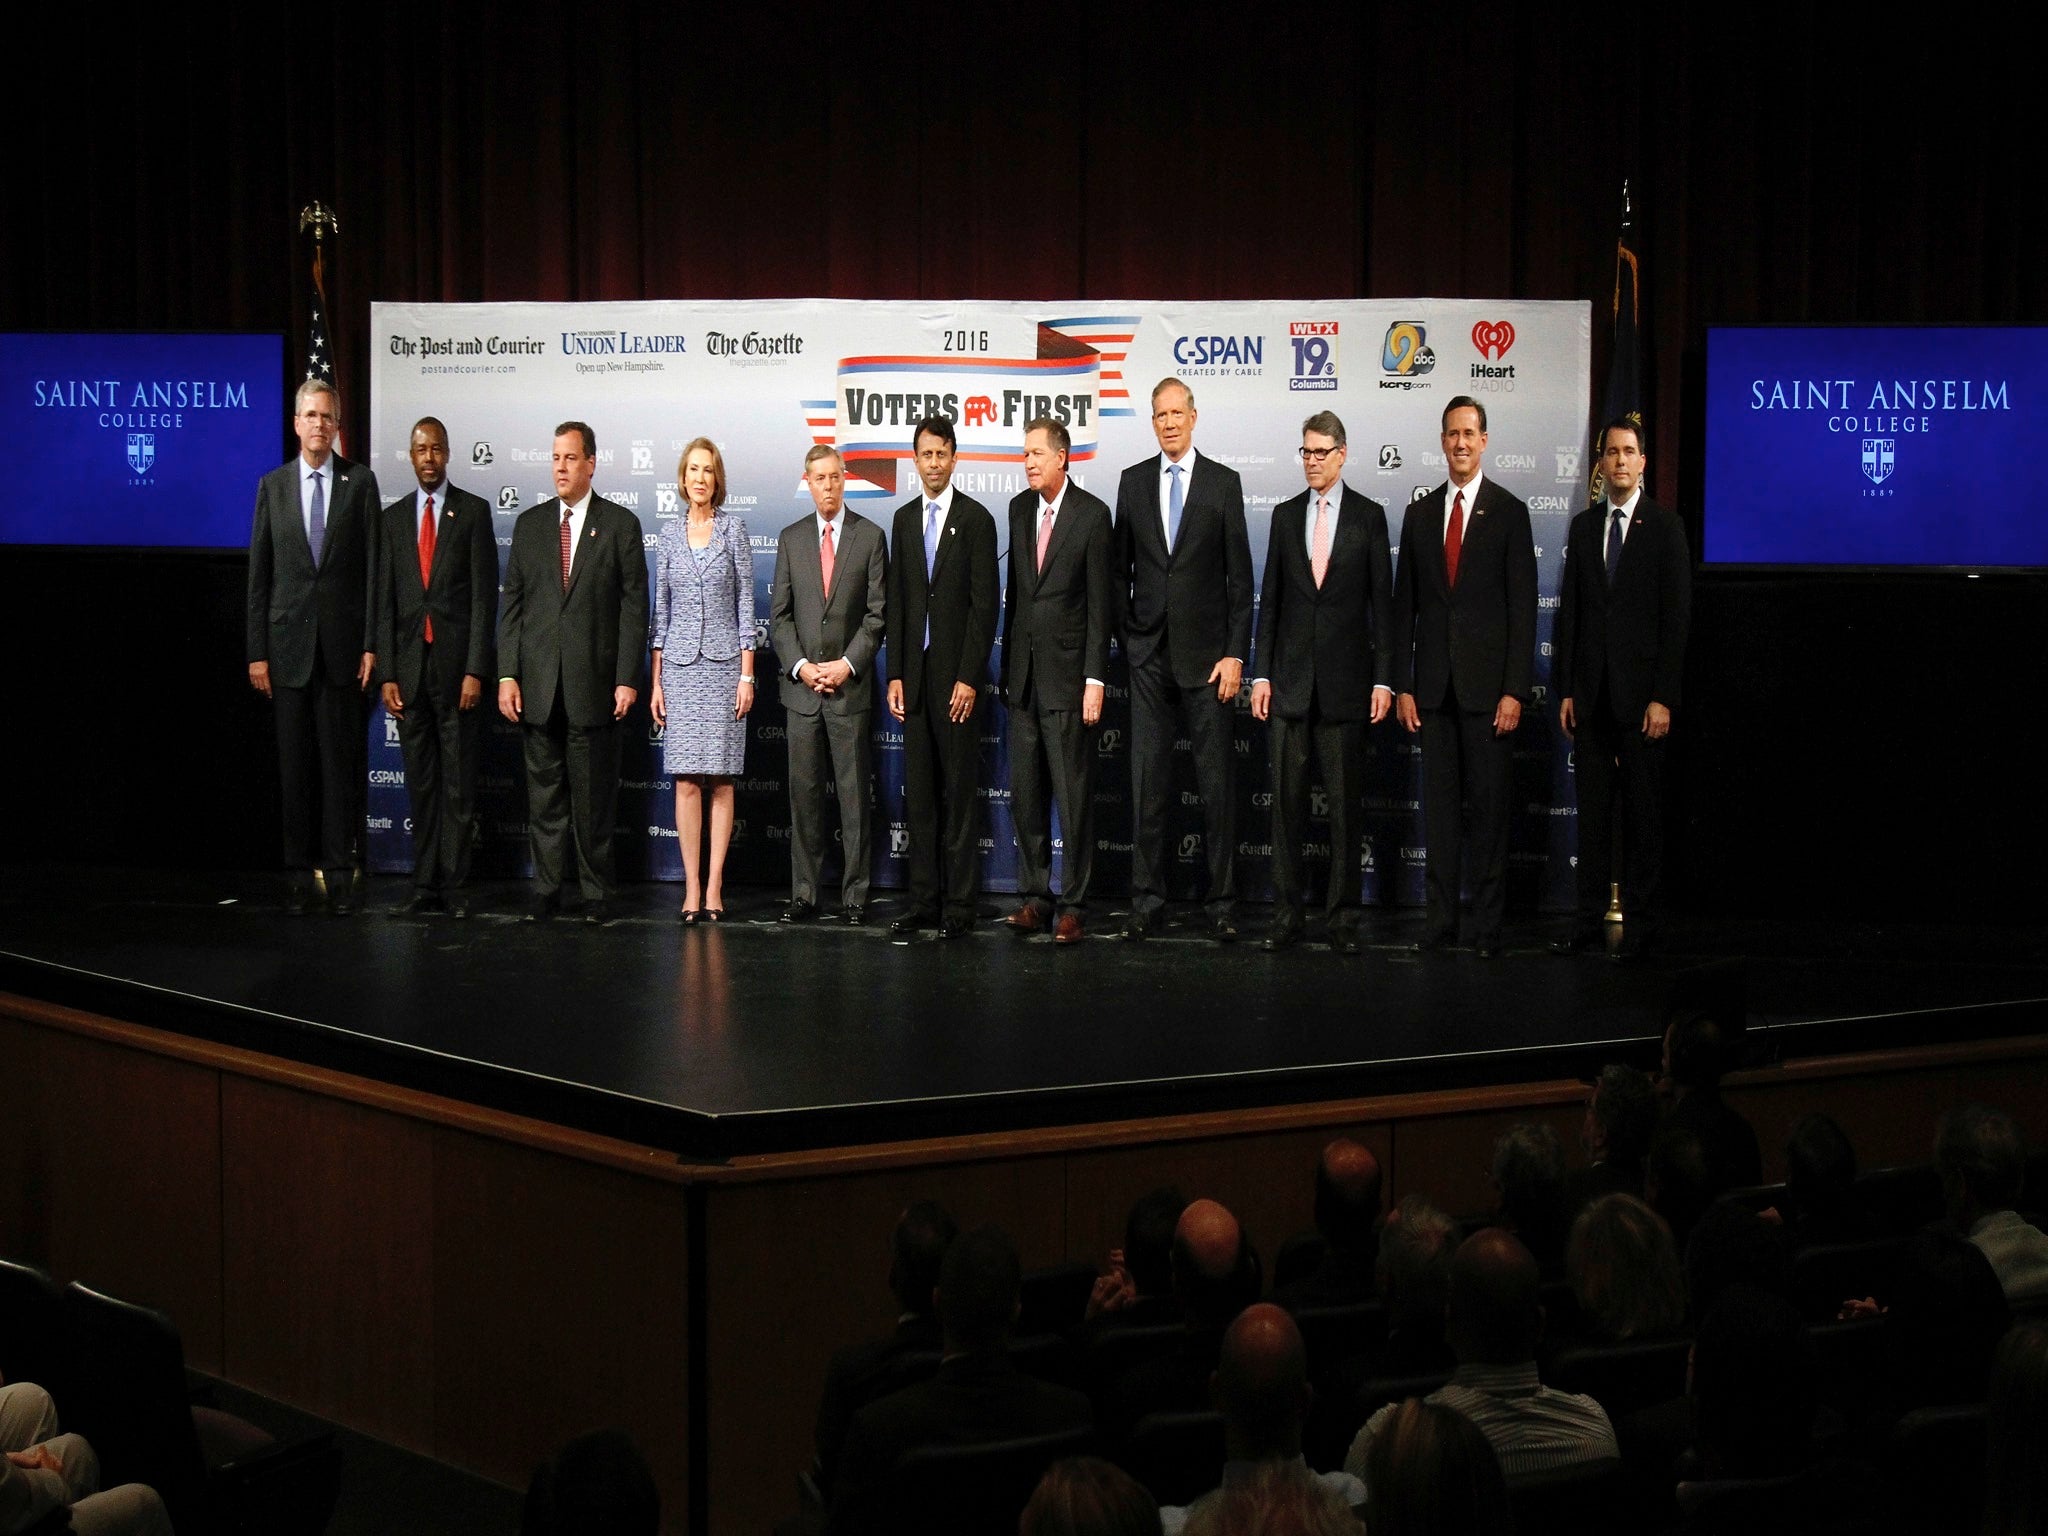 11 of the 14 candidates who took part in Monday's events